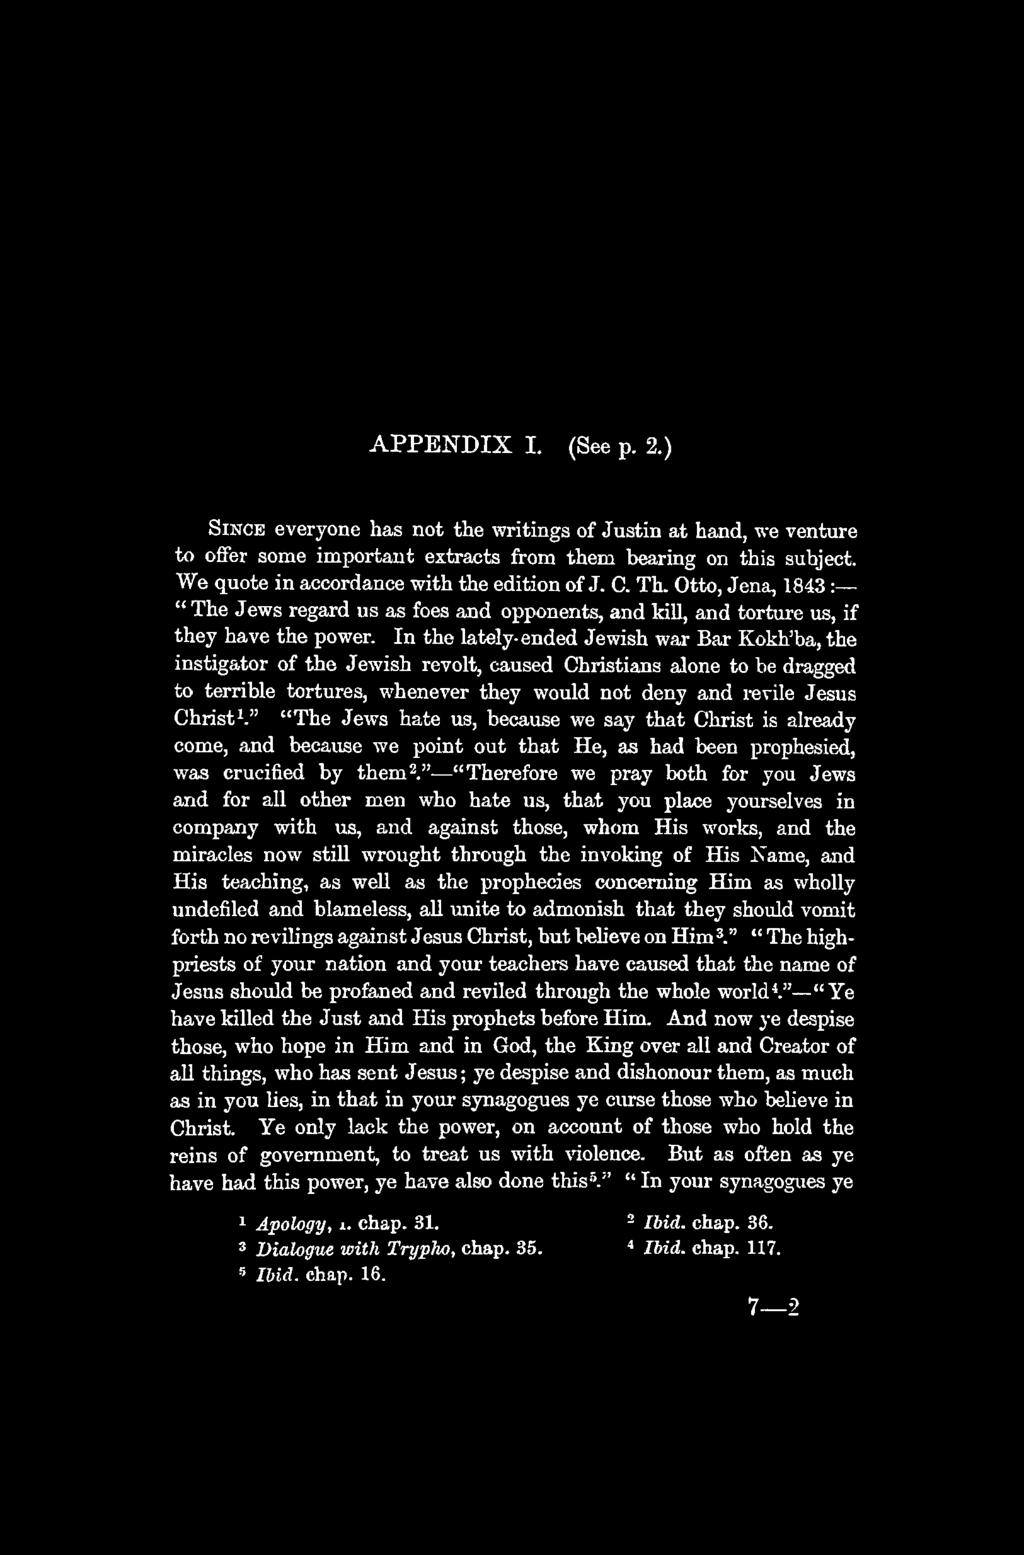 APPENDIX I. (See p. 2.) Since everyone has not the writings of Justin at hand, we venture to oflfer some important extracts from them bearing on this subject.